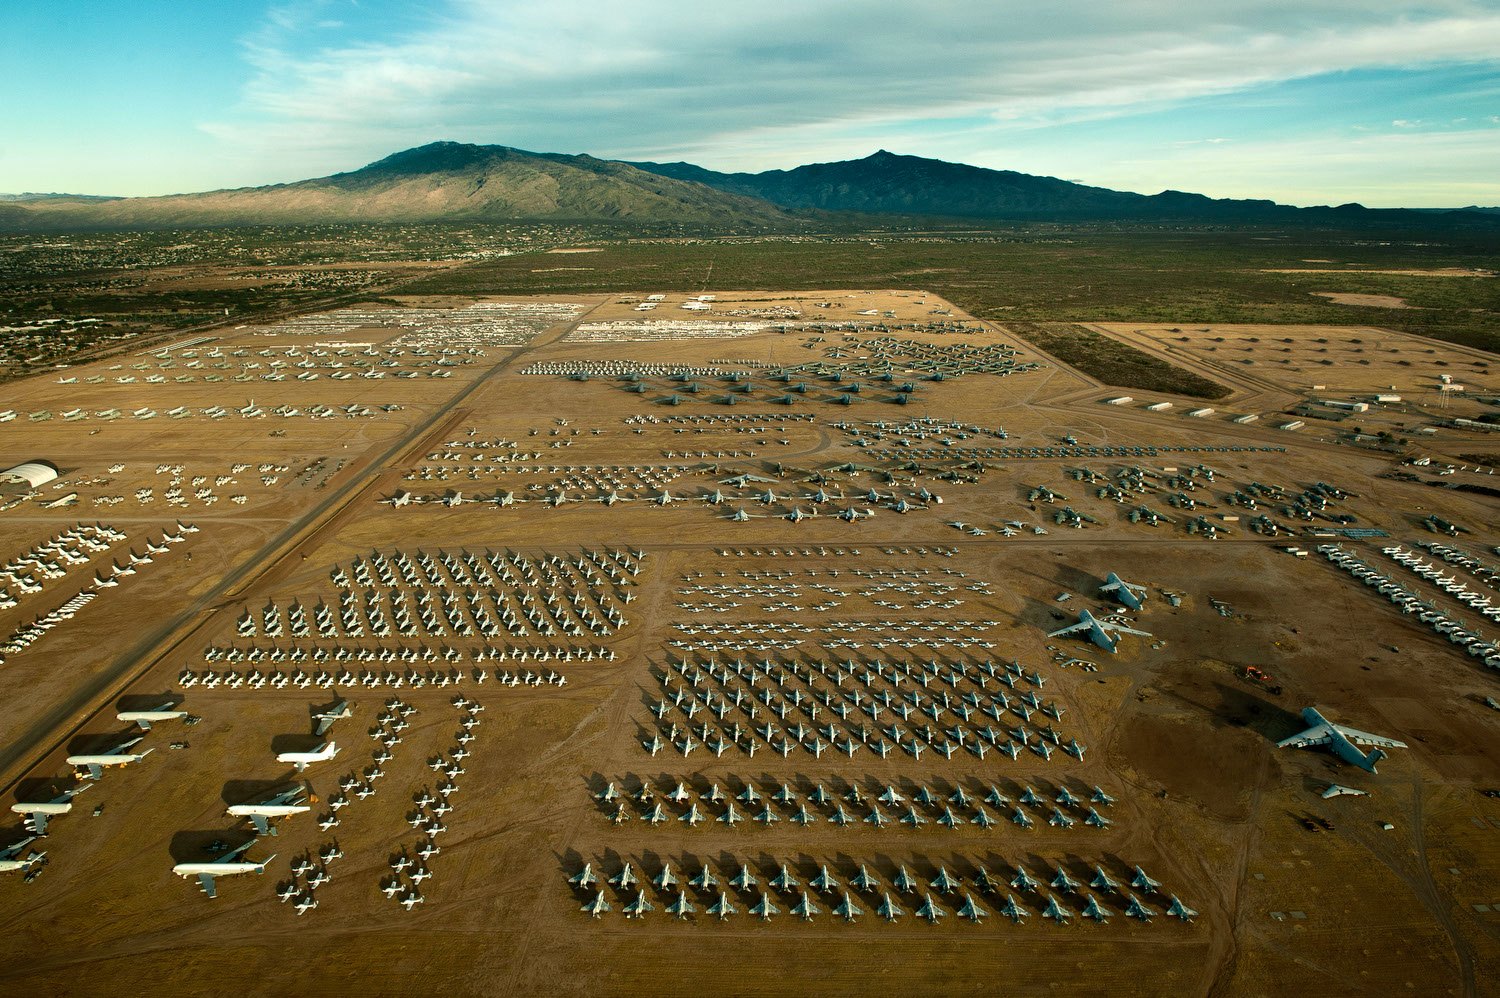 The Aircraft Boneyard in Tucson, Arizona, spanning 2,600 acres, serves as the final resting place for thousands of retired military and civilian aircraft. Its location in the arid desert ensures optimal conditions for long-term storage, minimizing corrosion and deterioration.